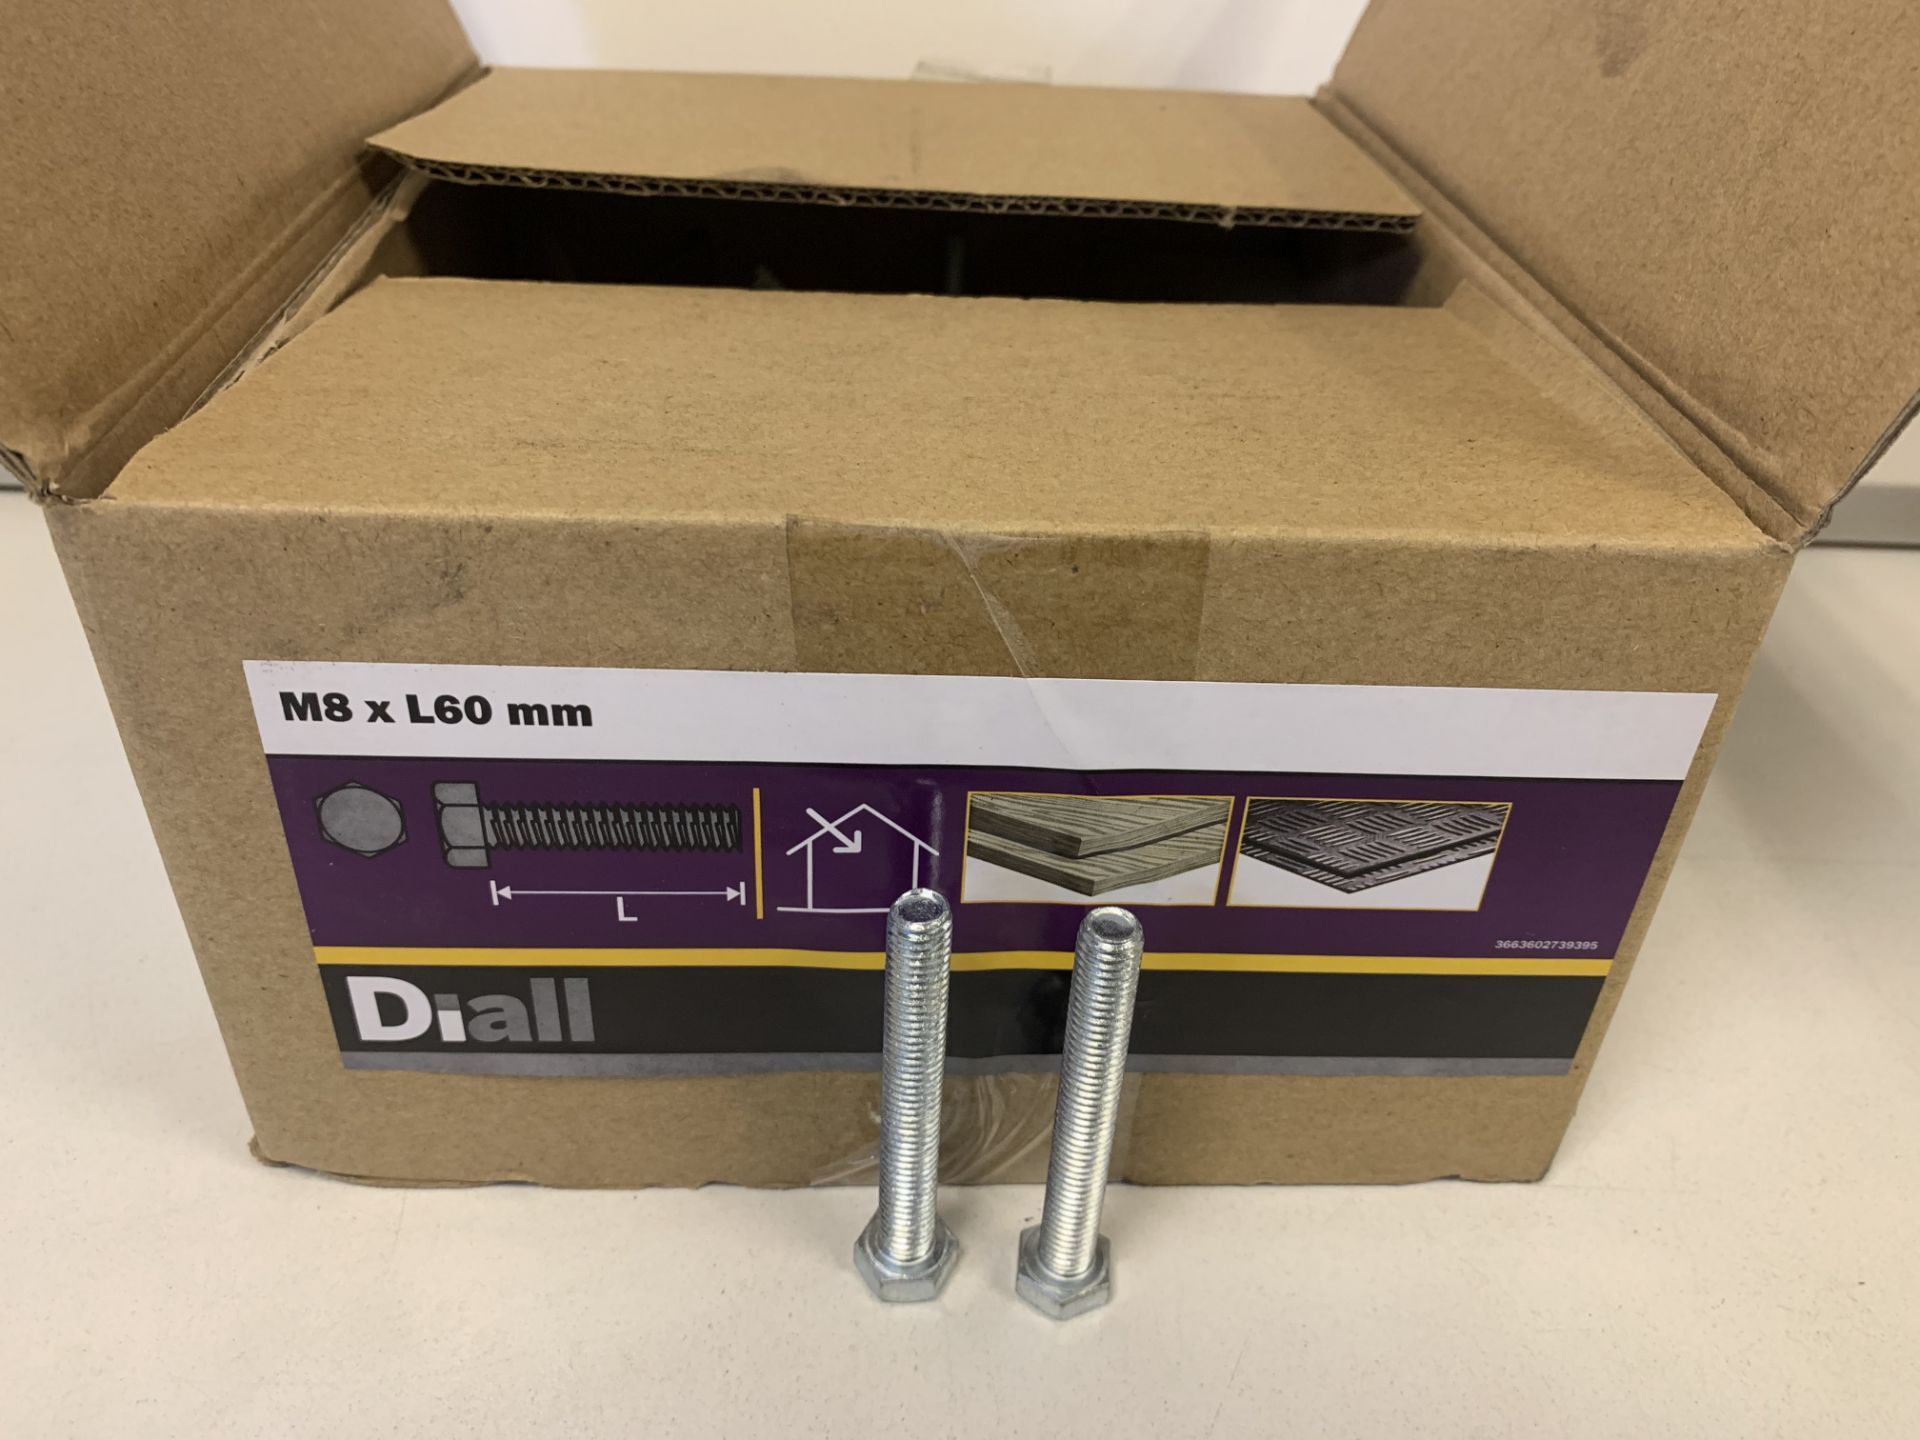 12 X BRAND NEW BOXES OF DIALL M8 X 60MM HEX BOLTS 4KG BOX (958/16)